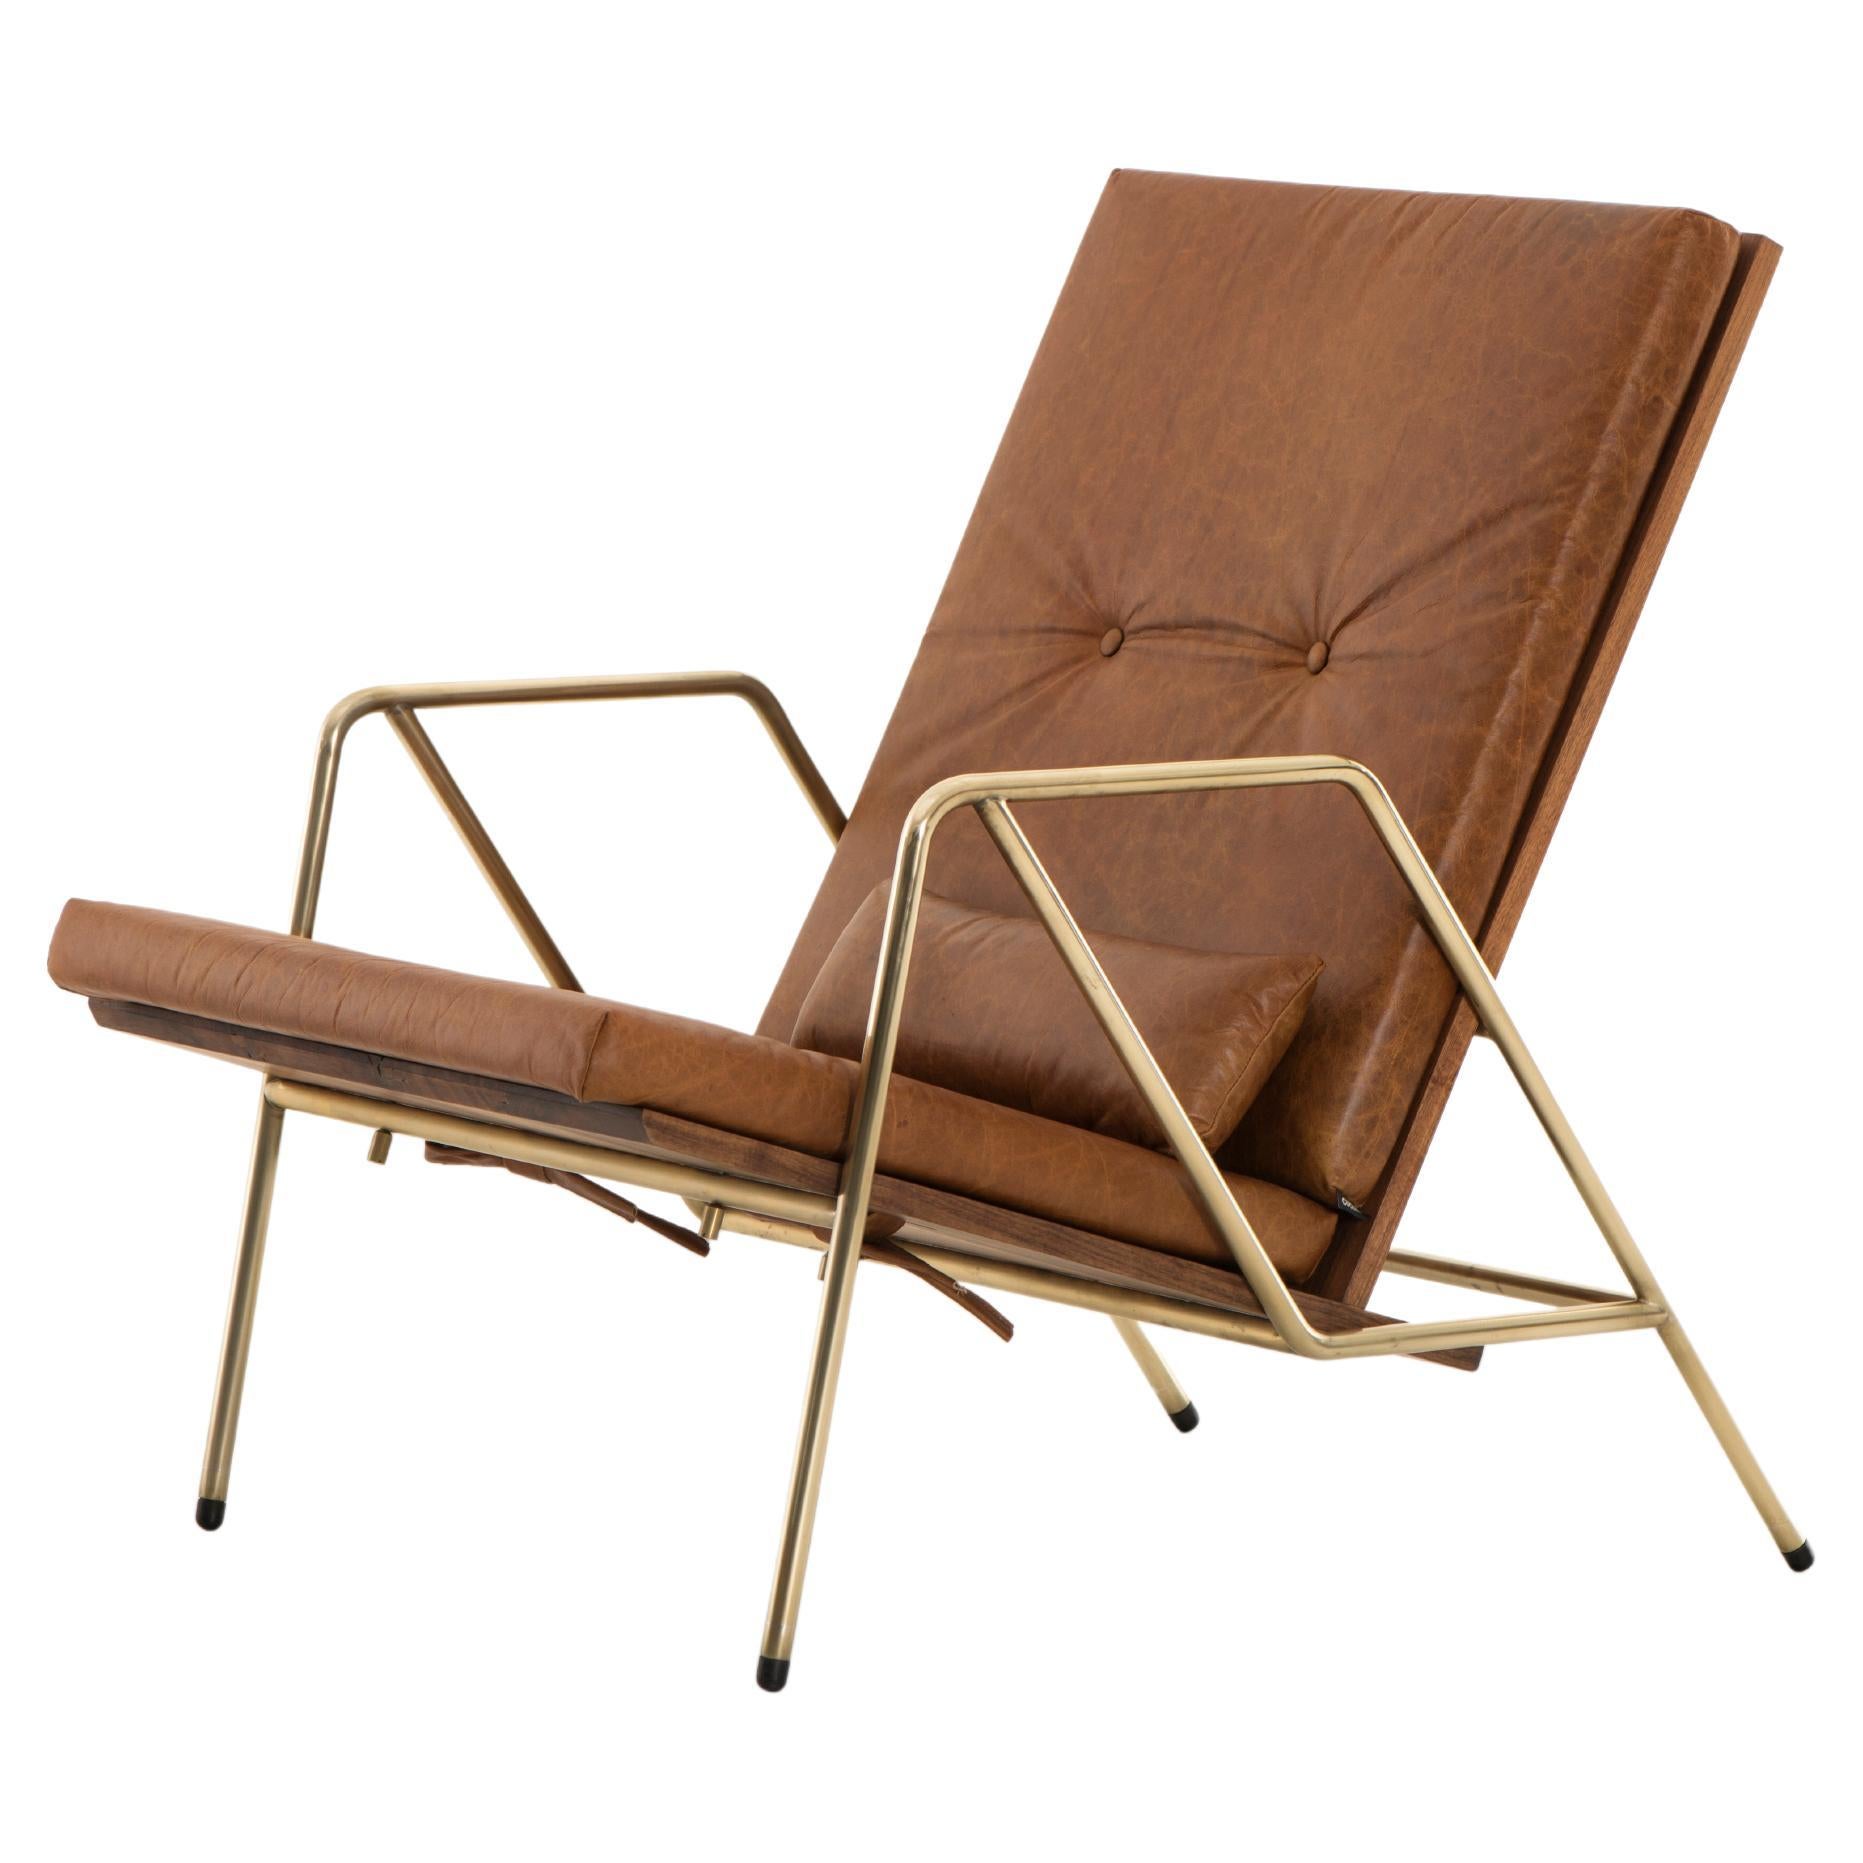 Tumbona DUNA, Mexican contemporary lounge chair by Emiliano Molina for CUCHARA For Sale